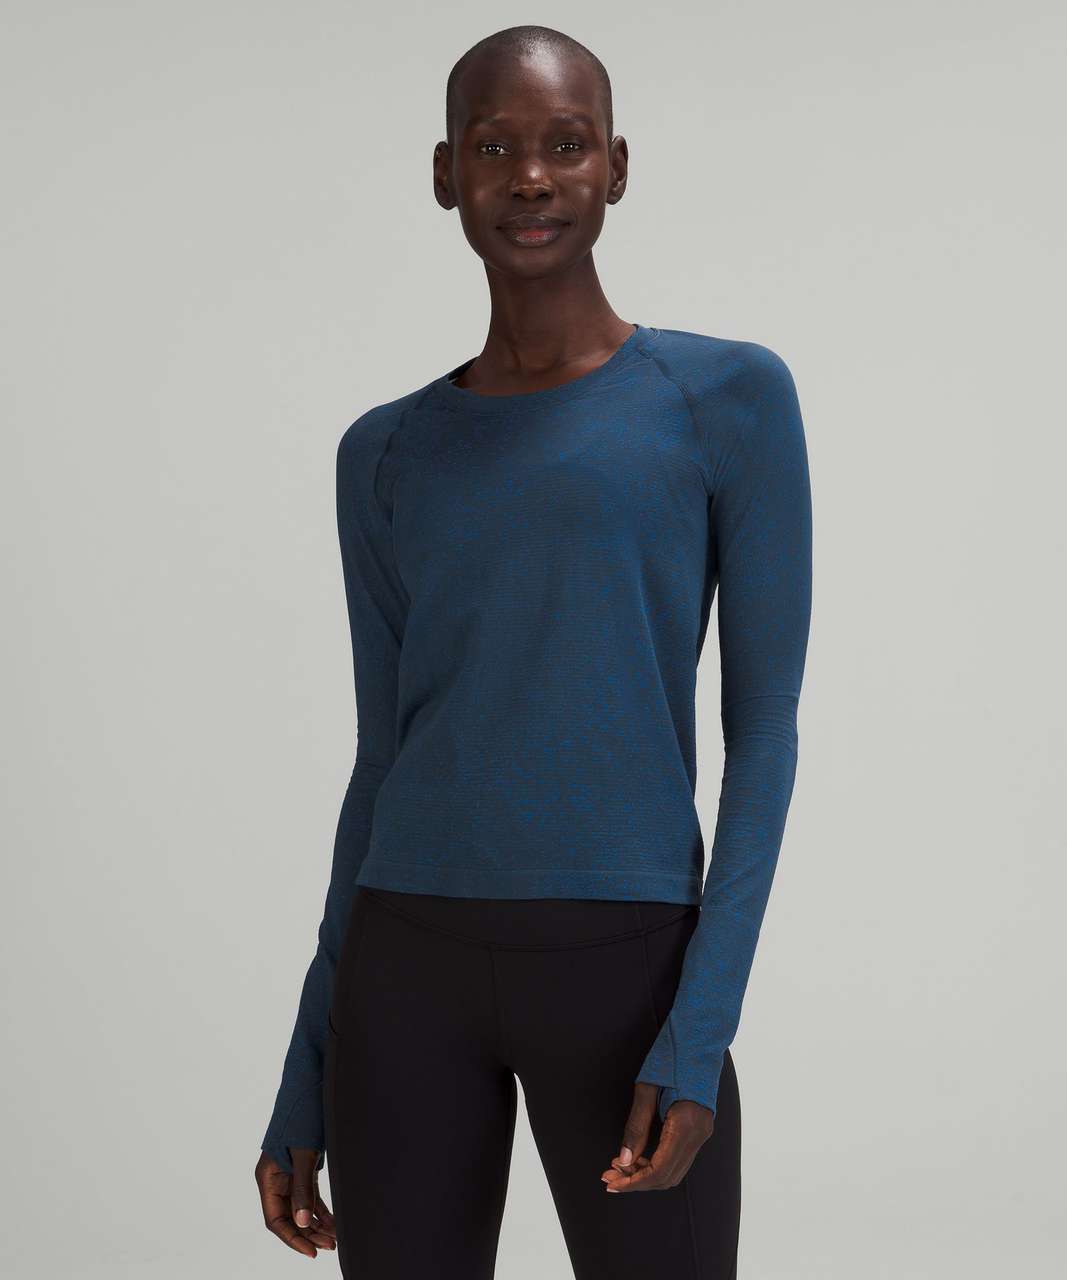 lululemon Swiftly Tech Shirt Look for Less - Straight A Style